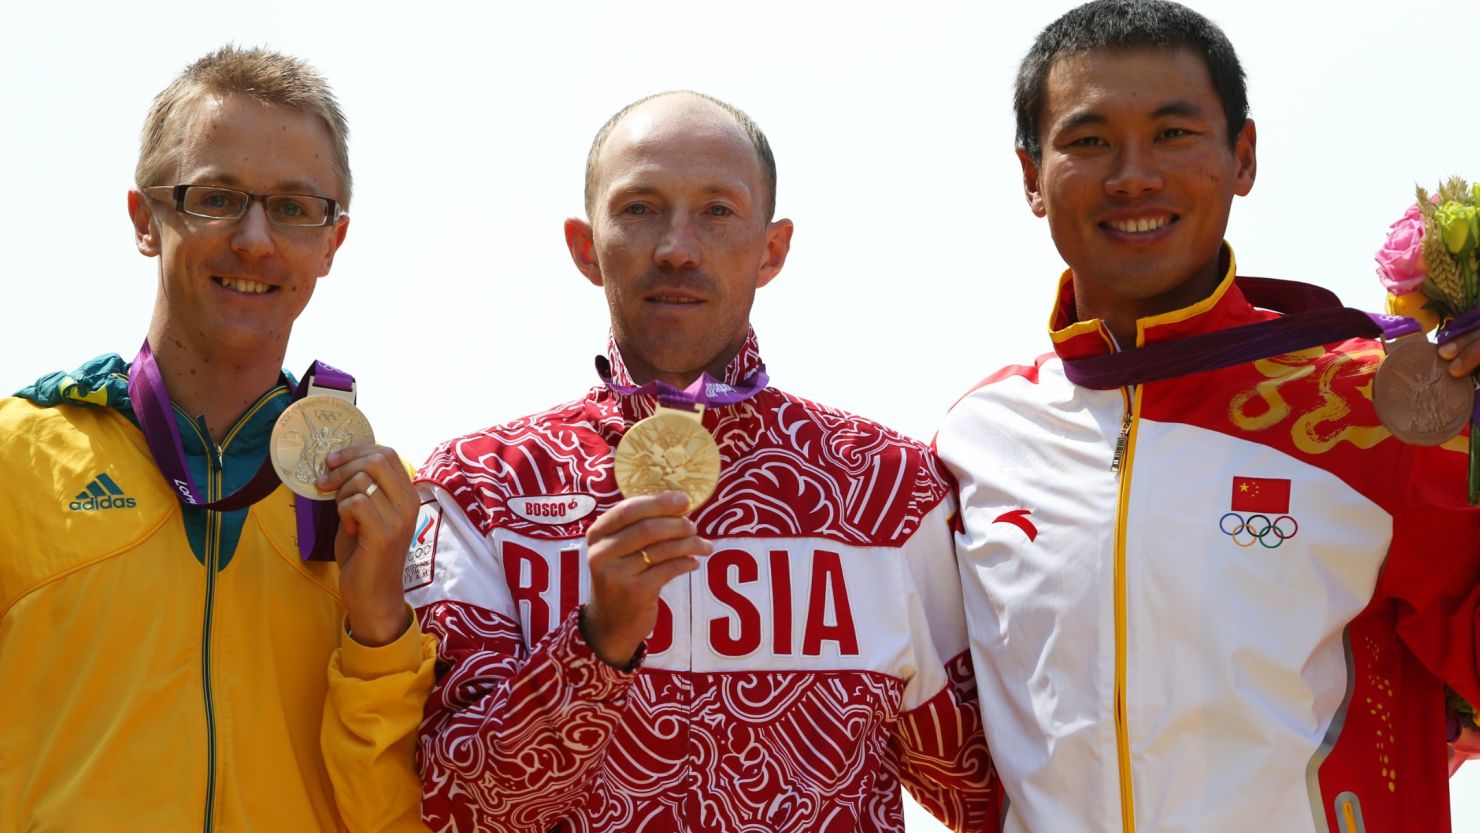 Jared Tallent stands next to Russian gold medalist Sergey Kirdyapkin (center) during a London 2012 Olympics medal ceremony. Tallent says he was robbed of first place by Kirdyapkin, a known drug cheat. 